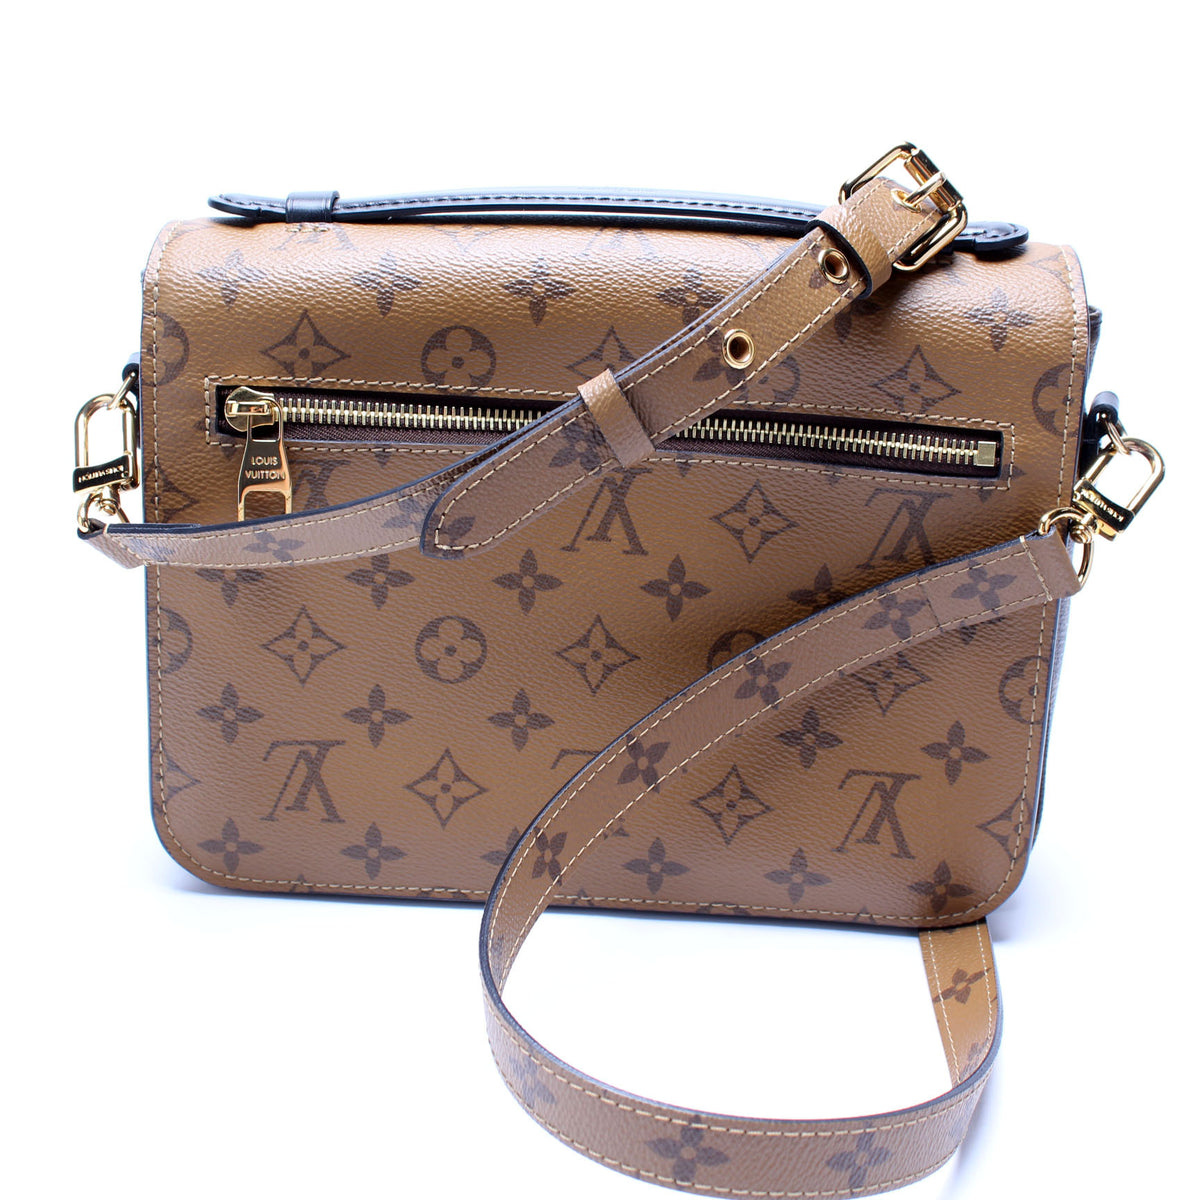 An Authenticator's Guide to a Real vs. Fake Louis Vuitton Pochette Metis